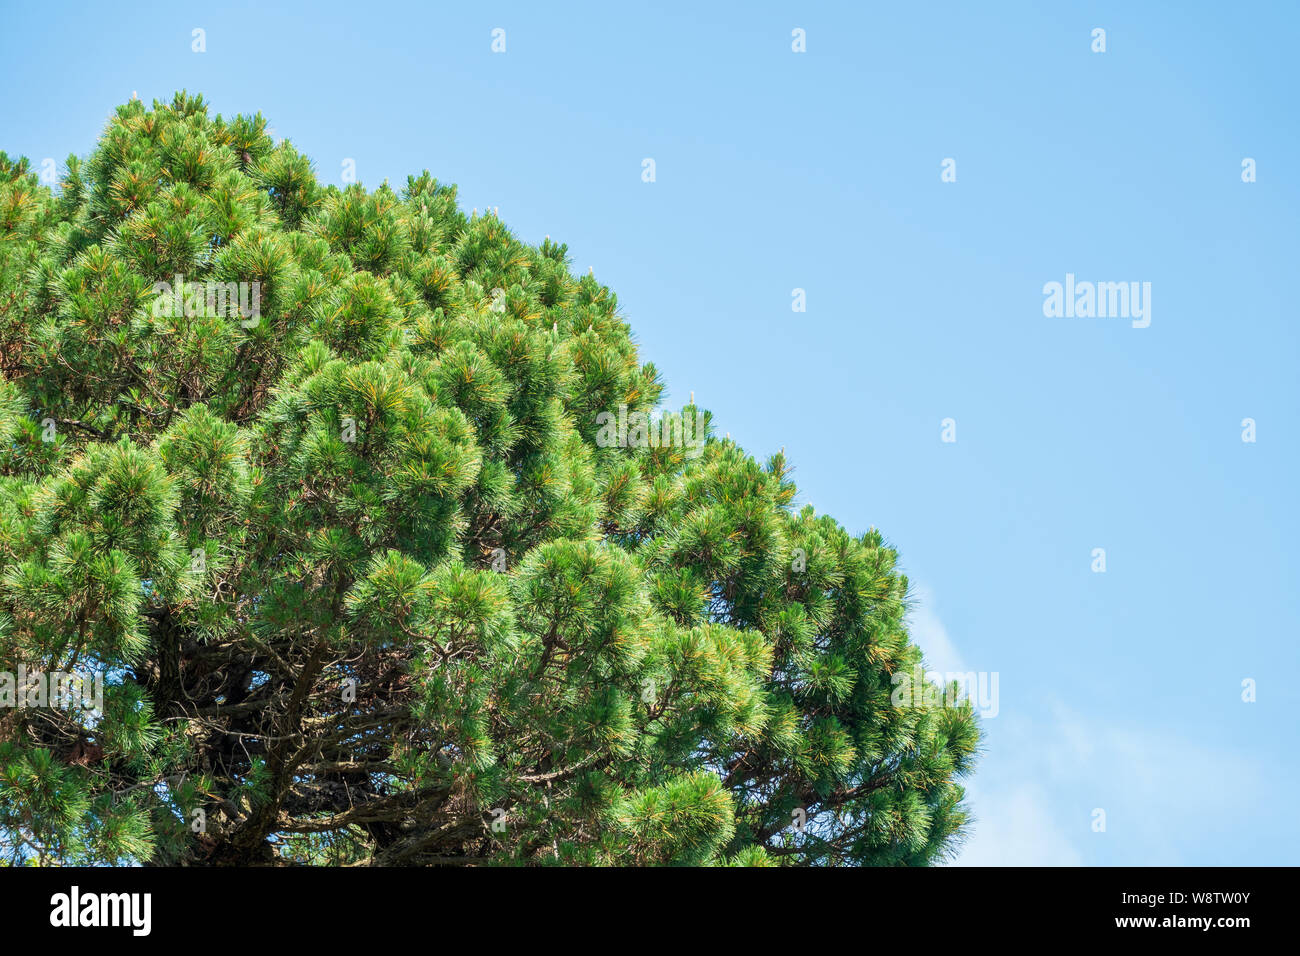 Crown of lush green pine tree with long needles on a background of blue sky. Freshness, nature, concept. Latin: Pinus brutia Stock Photo